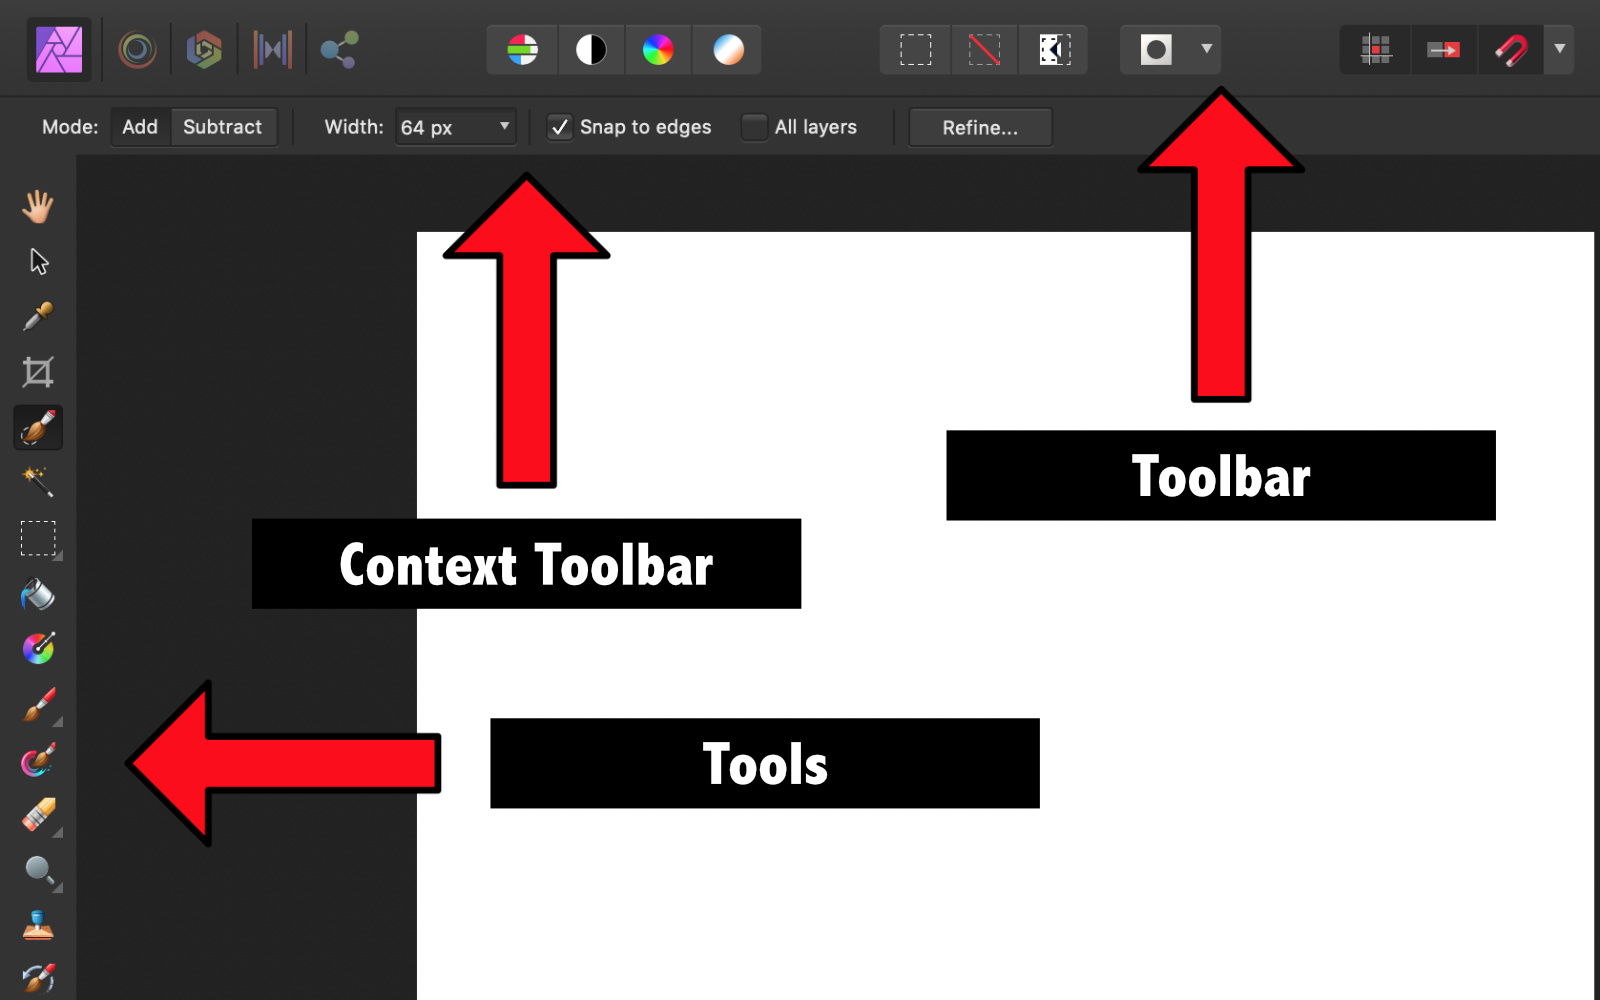 Affinity Photo has tools, a toolbar, and a context toolbar. 